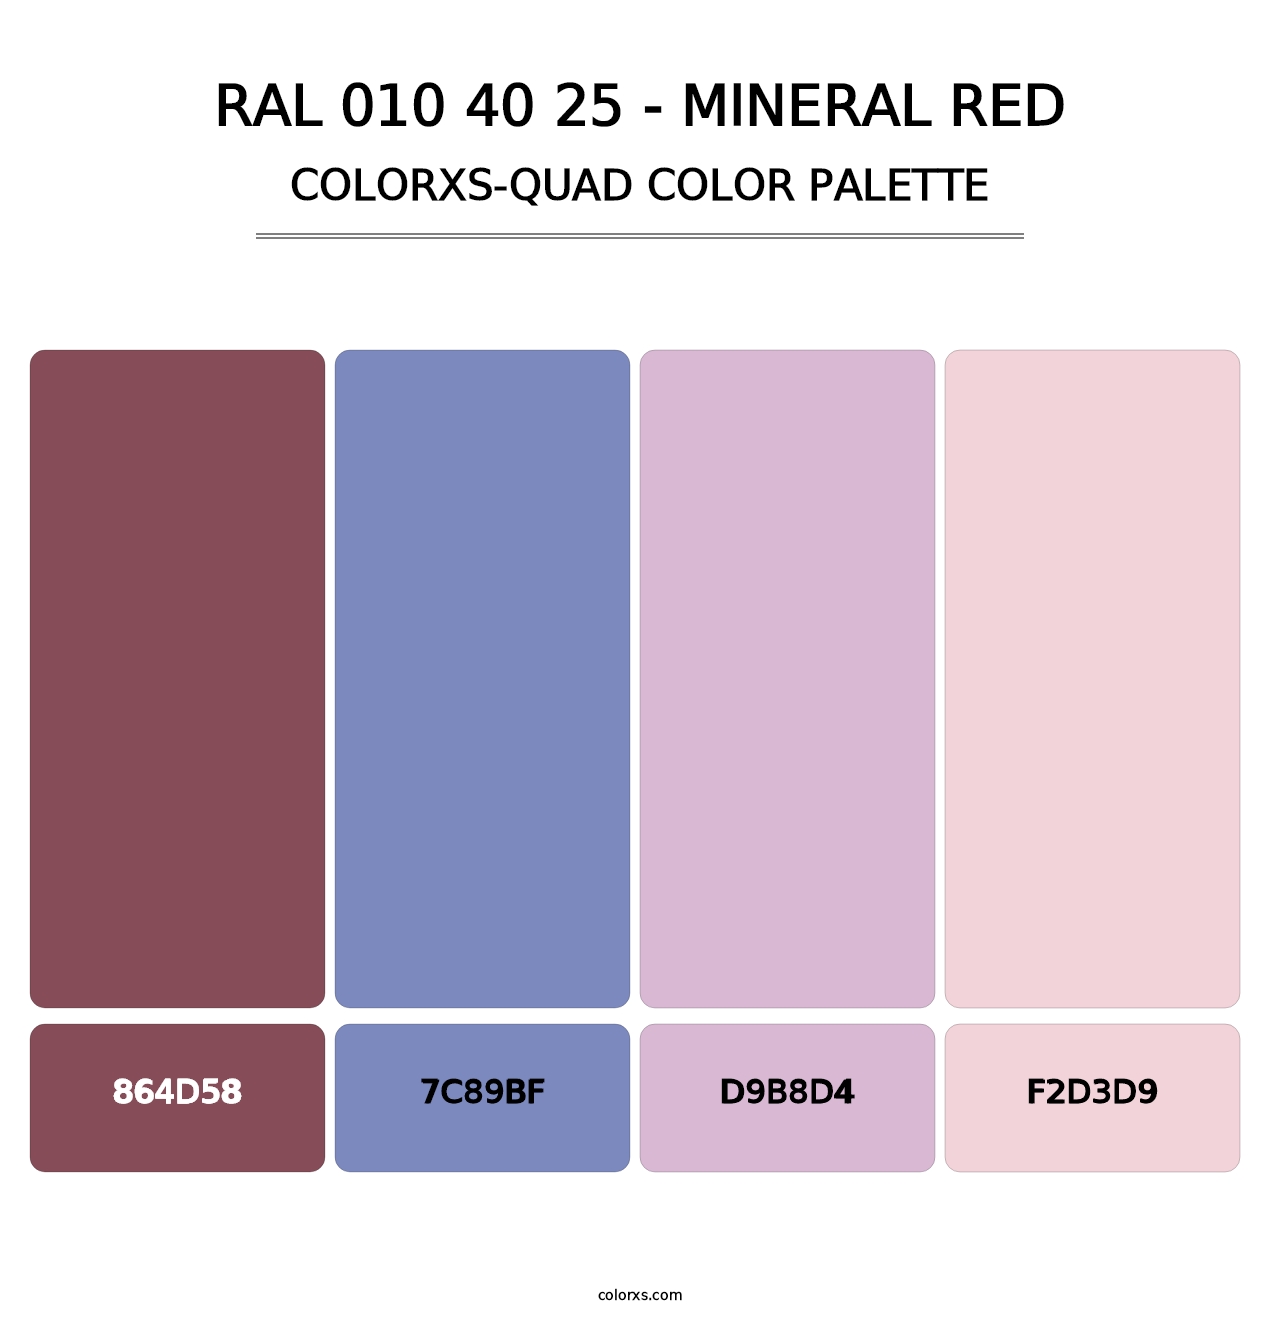 RAL 010 40 25 - Mineral Red - Colorxs Quad Palette